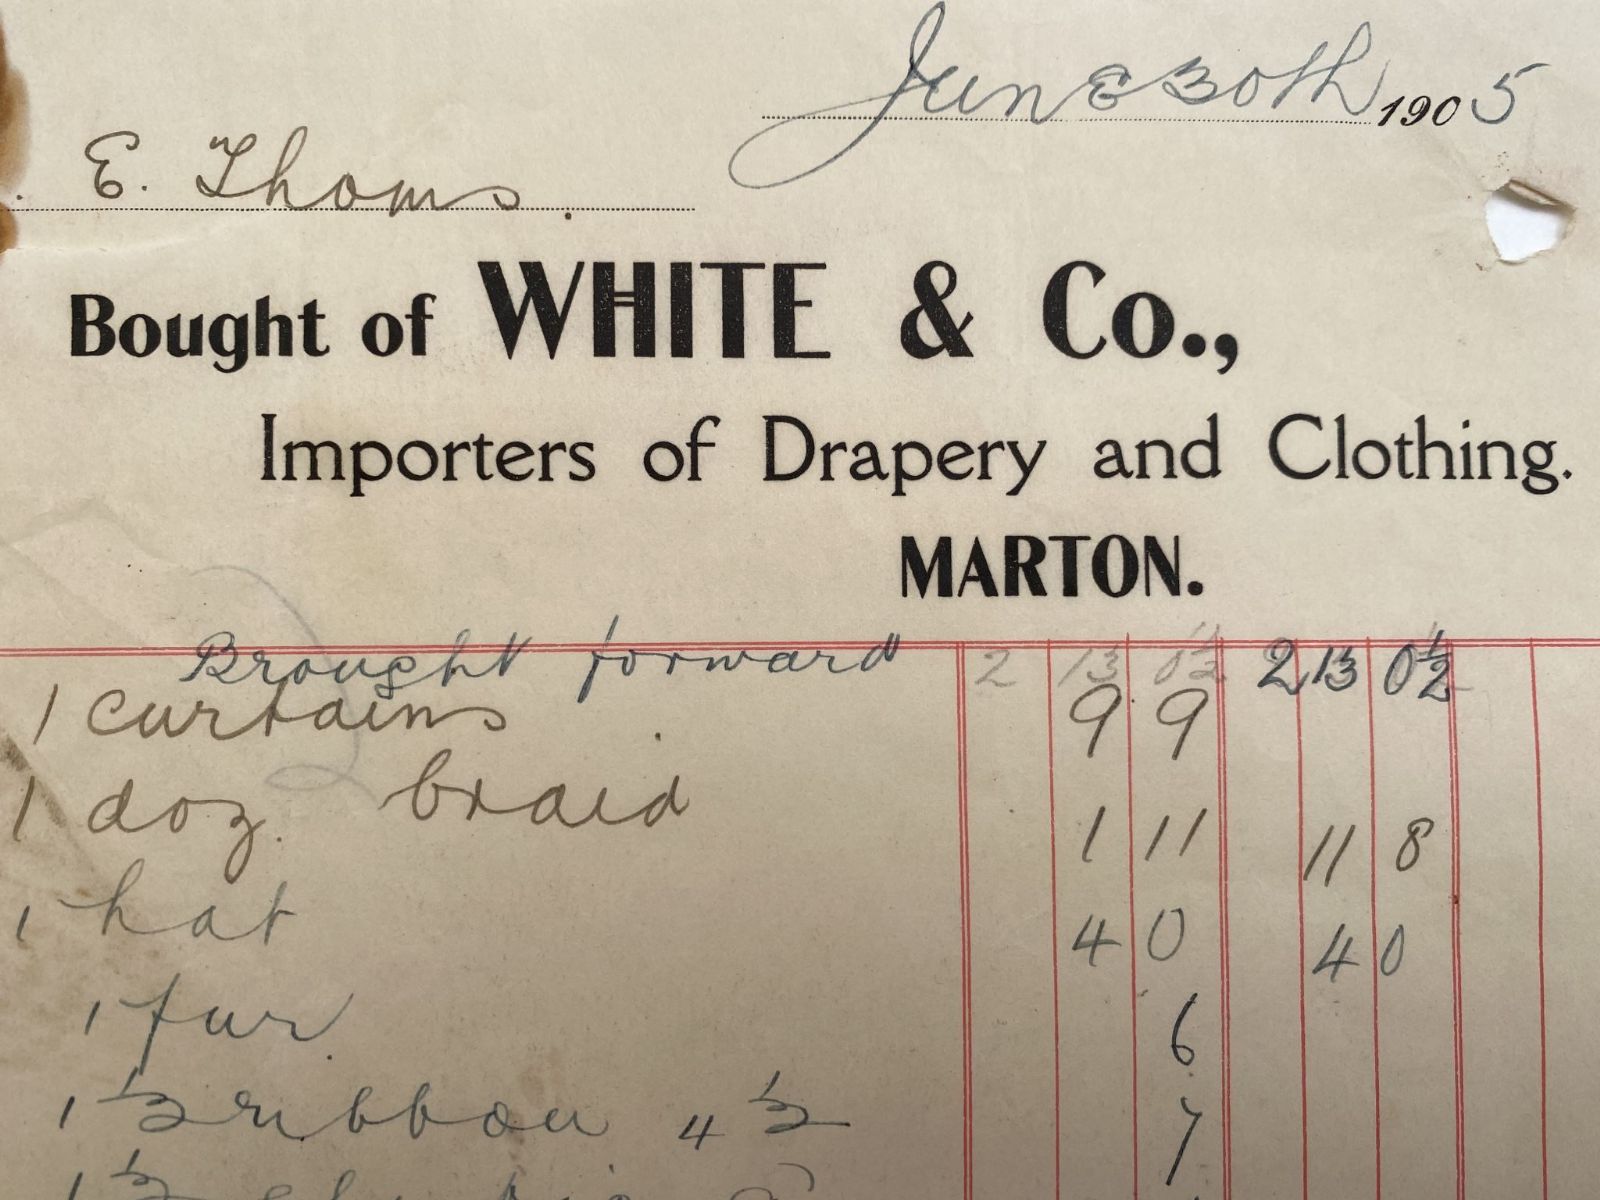 ANTIQUE INVOICE / RECEIPT: White & Co, Drapery & Clothing Importers 1905